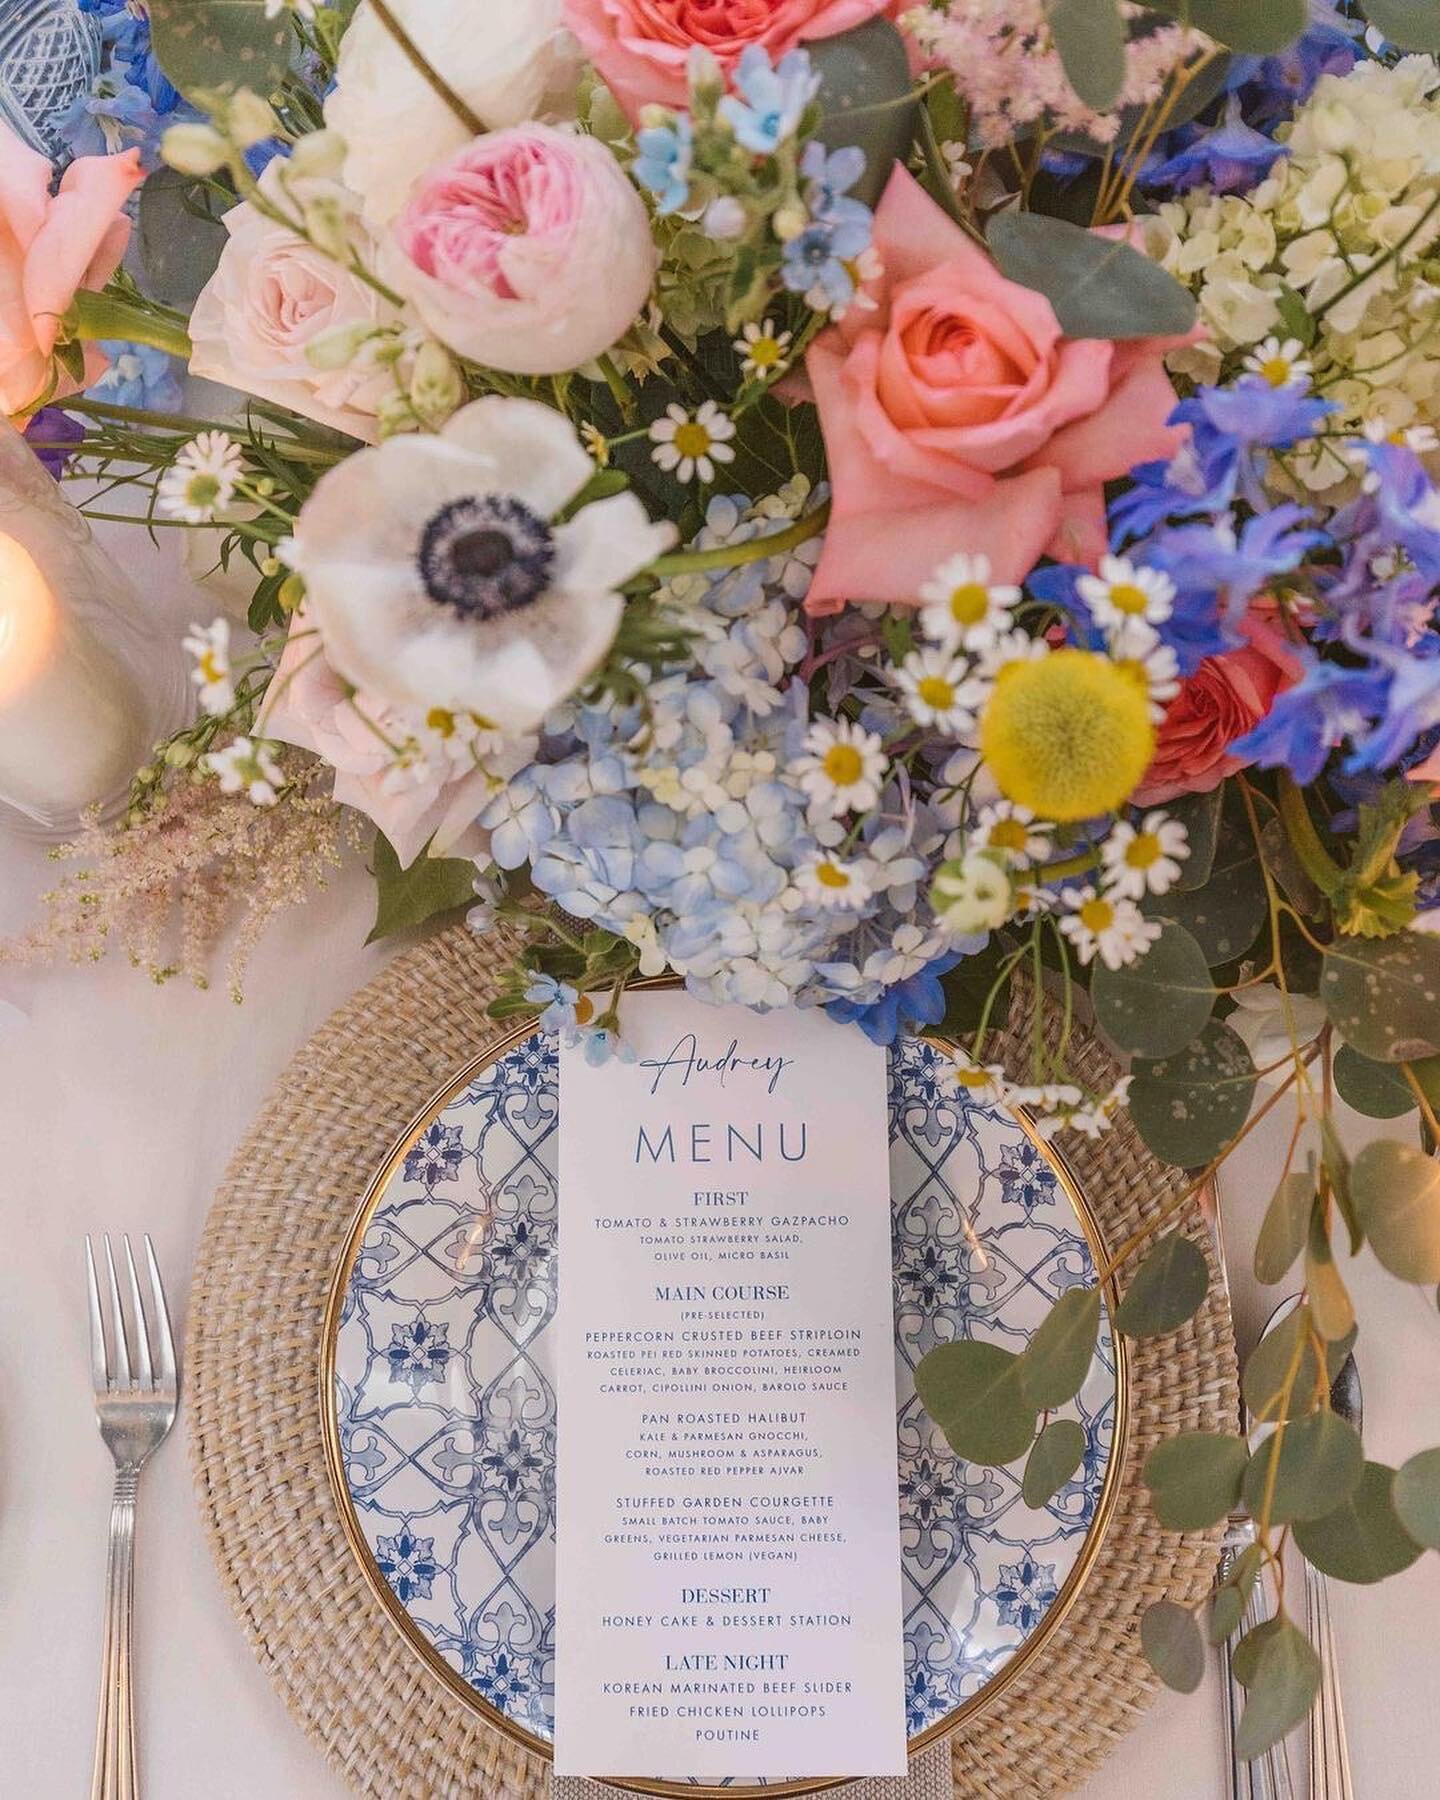 @blisstoronto It was so rewarding to see this all come together for Weina &amp; Flo!

The abundant, colourful flowers were a statement of pure joy. 

Photography: @rebecca_wood 
Full logistics &amp; planning: @blisstoronto 
Location &amp; Carering: @